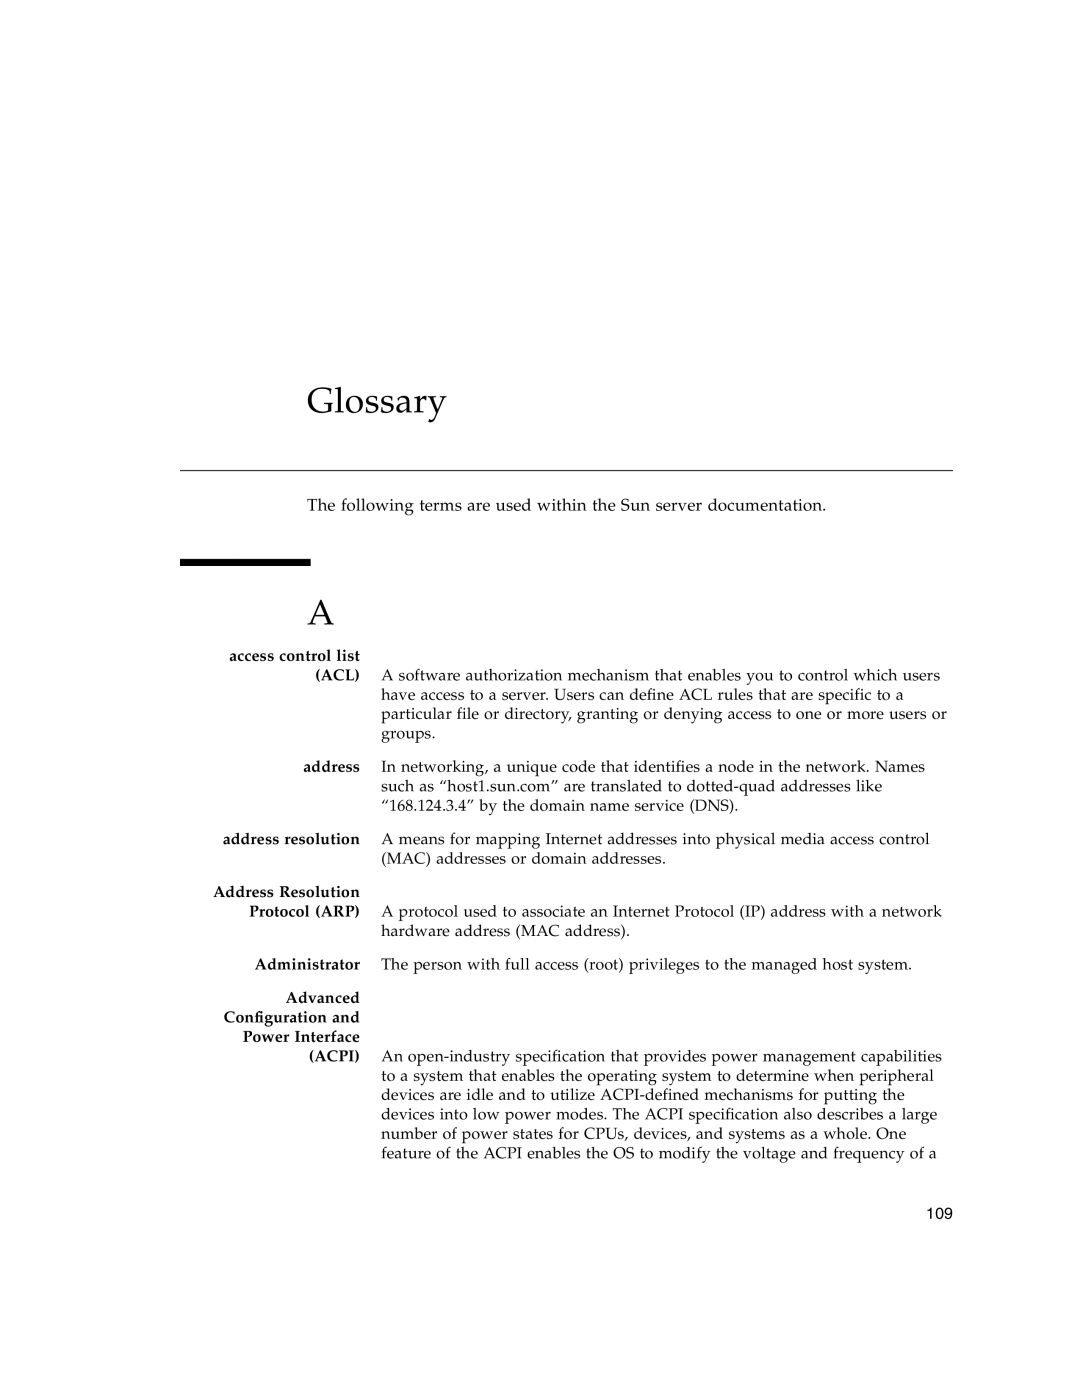 Sun Microsystems X4150 Glossary, The following terms are used within the Sun server documentation, access control list 